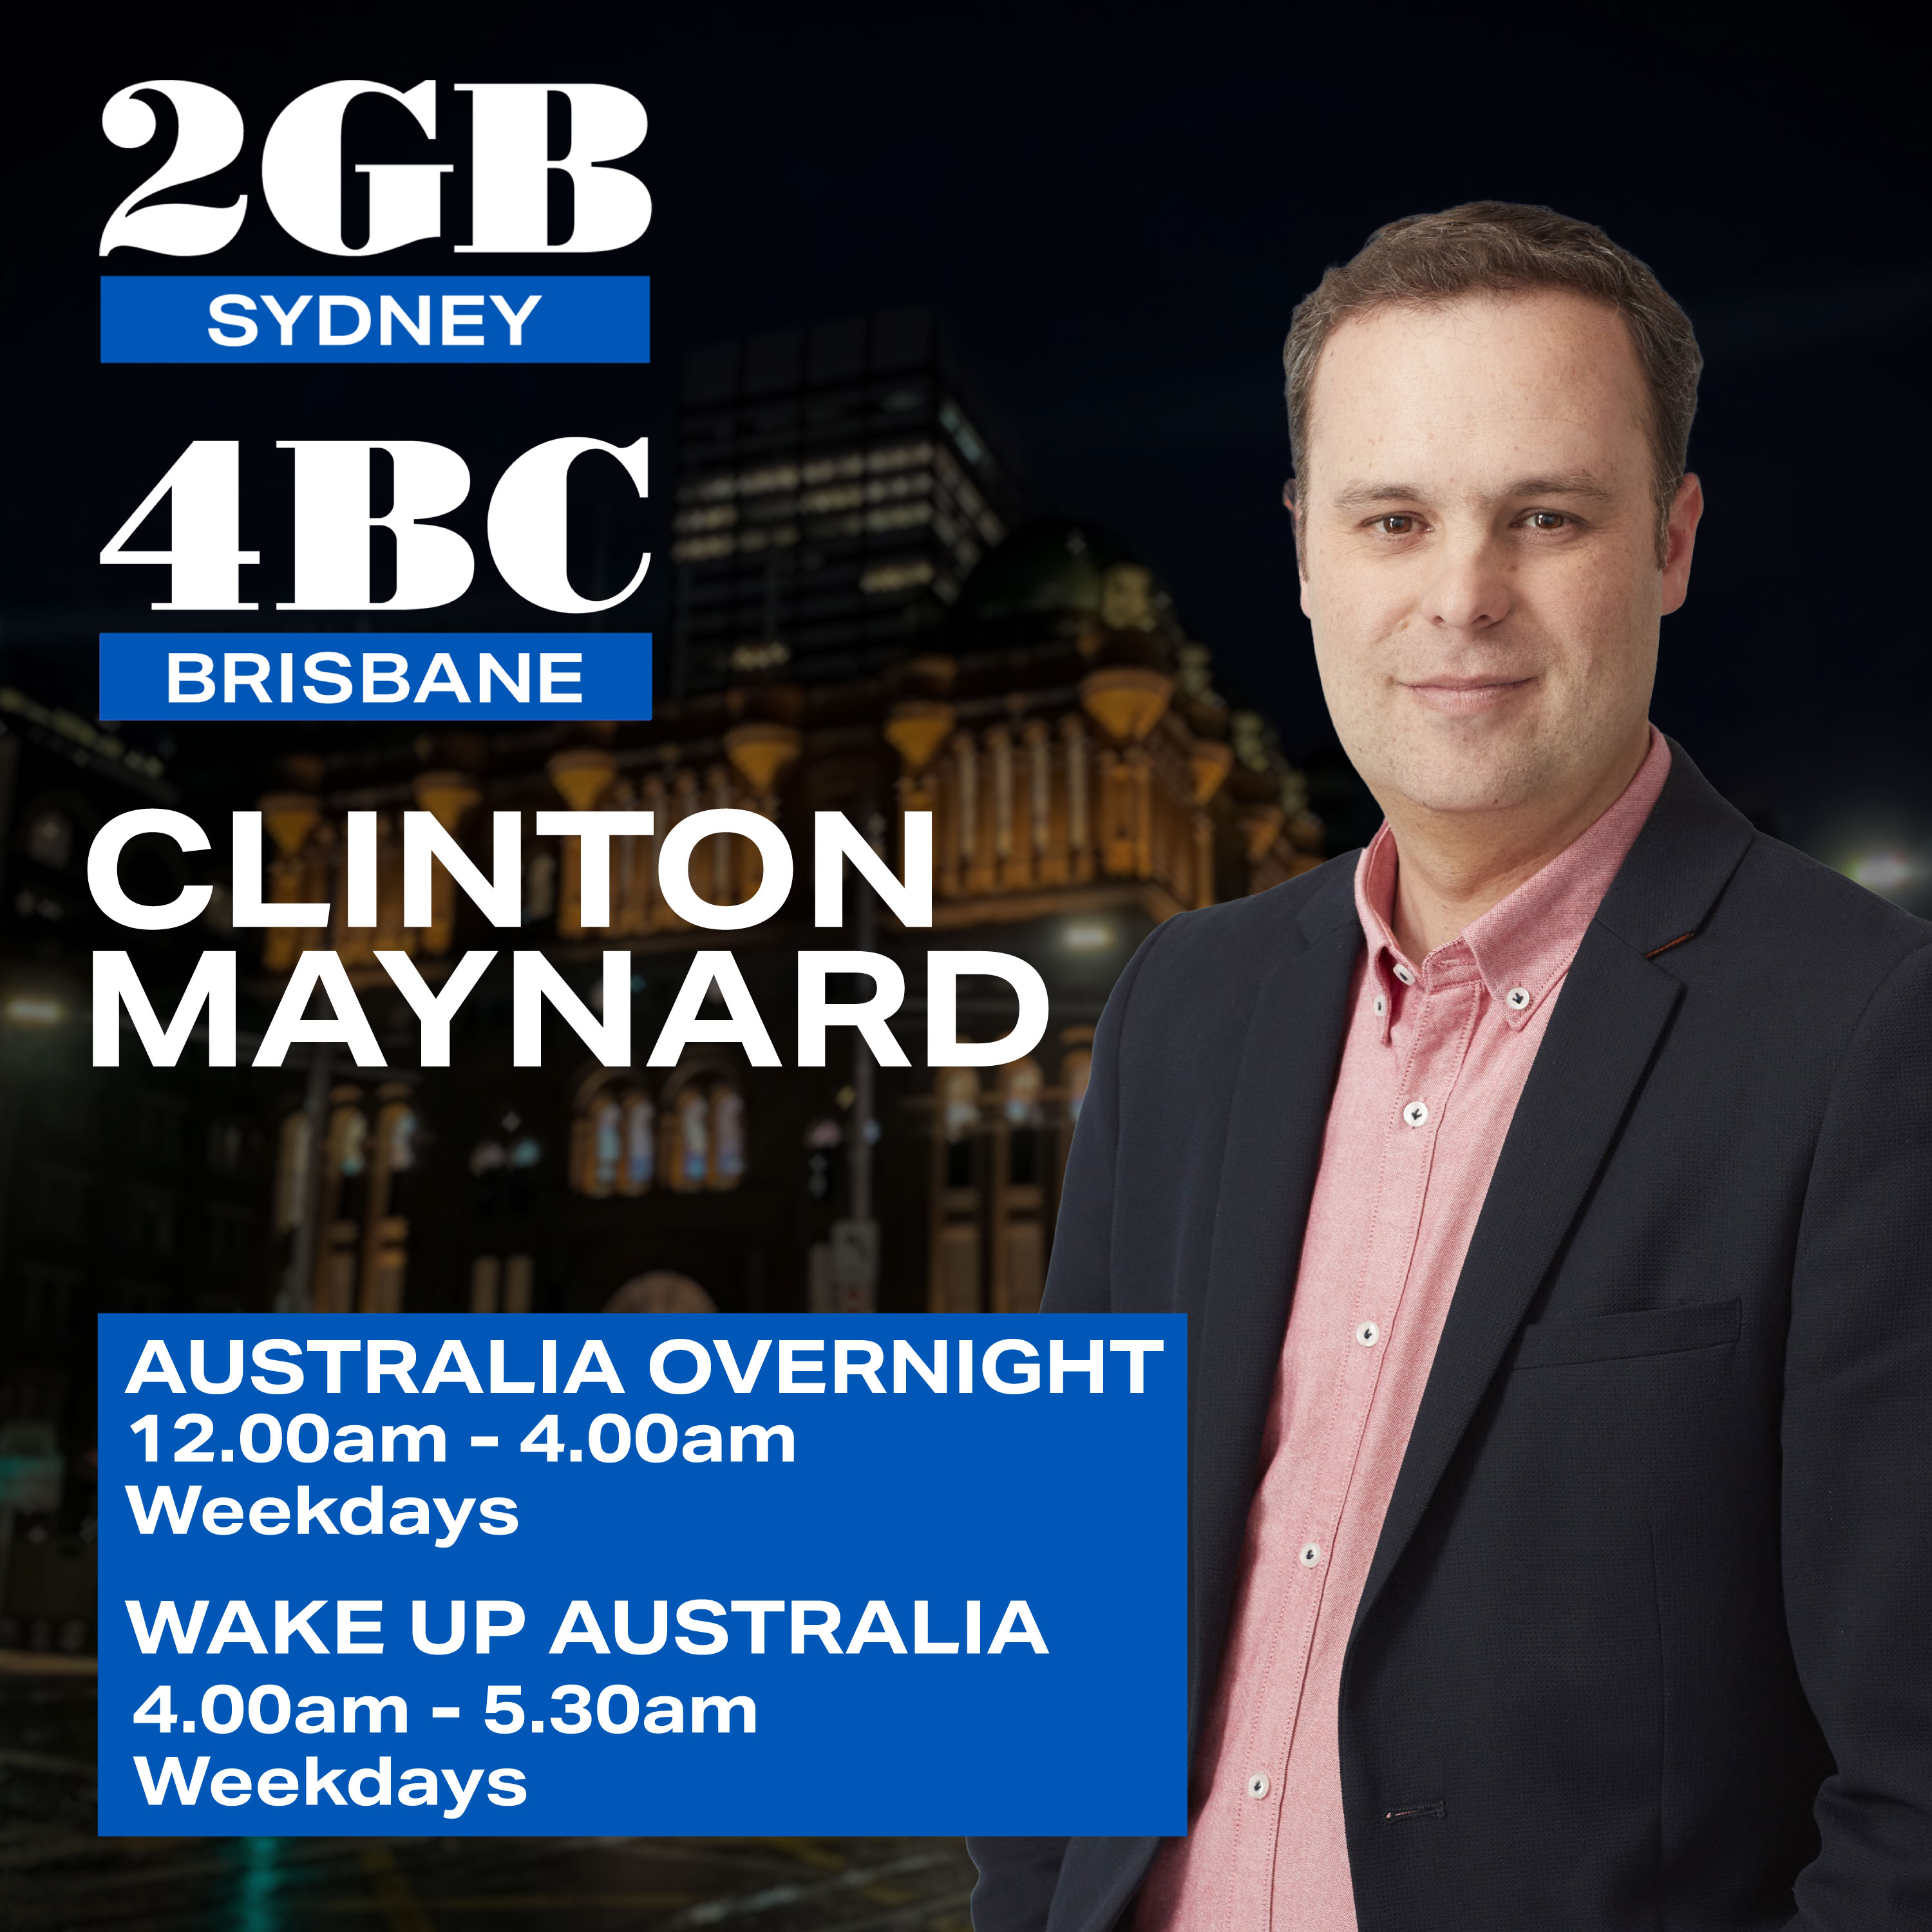 Overnights with Clinton Maynard - Tuesday 30th of April